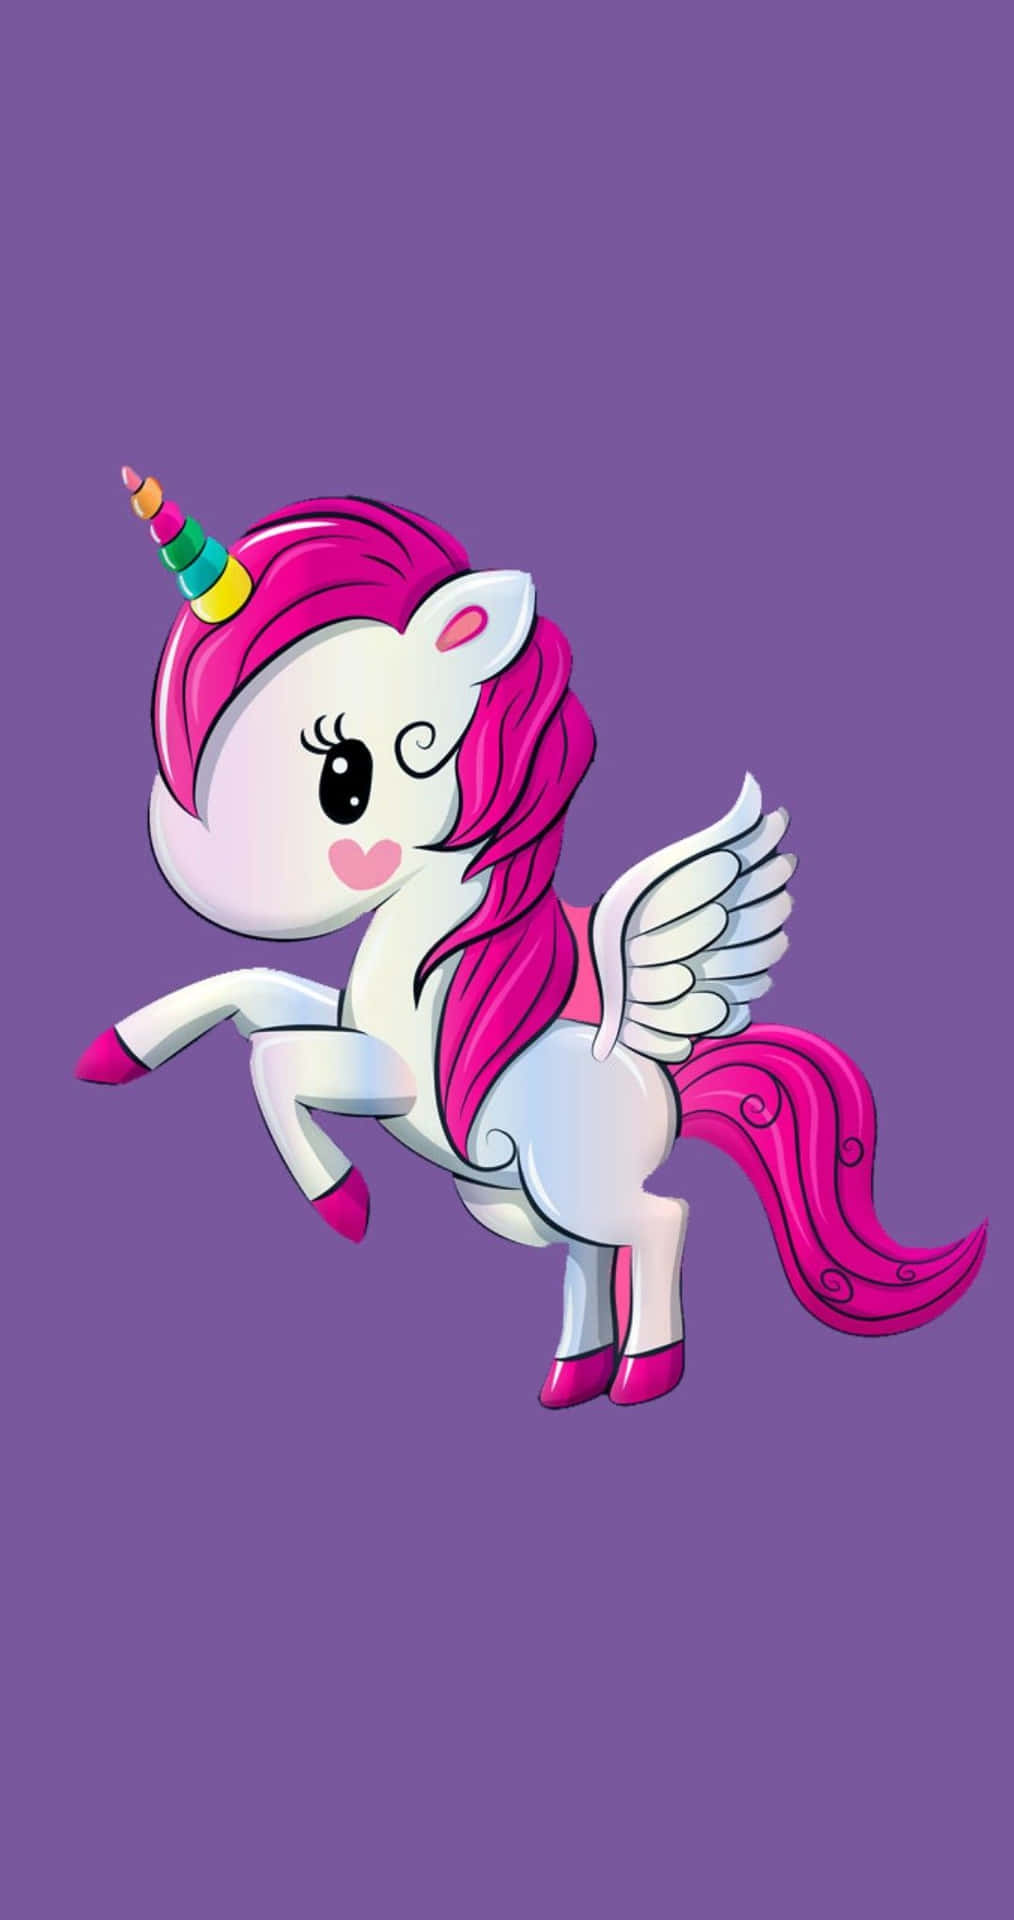 A Cartoon Unicorn With Pink Wings And A Pink Crown